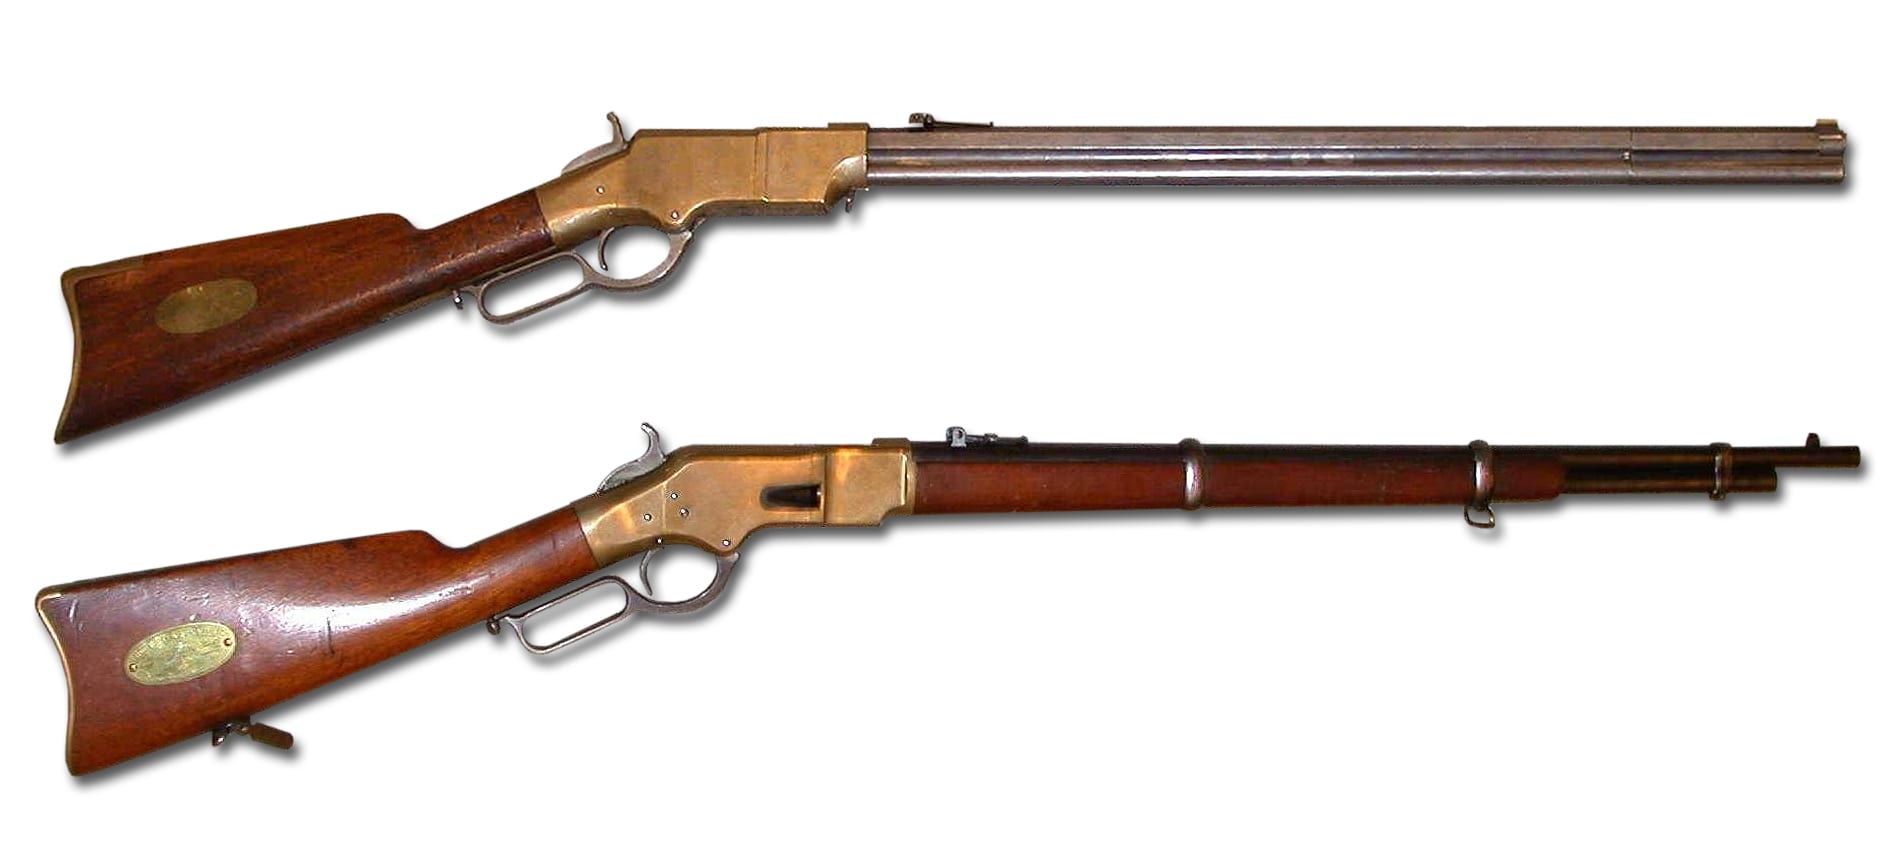 An early Henry Rifle and a Winchester Mod 1866 Rifle, both .44 caliber Rimfire